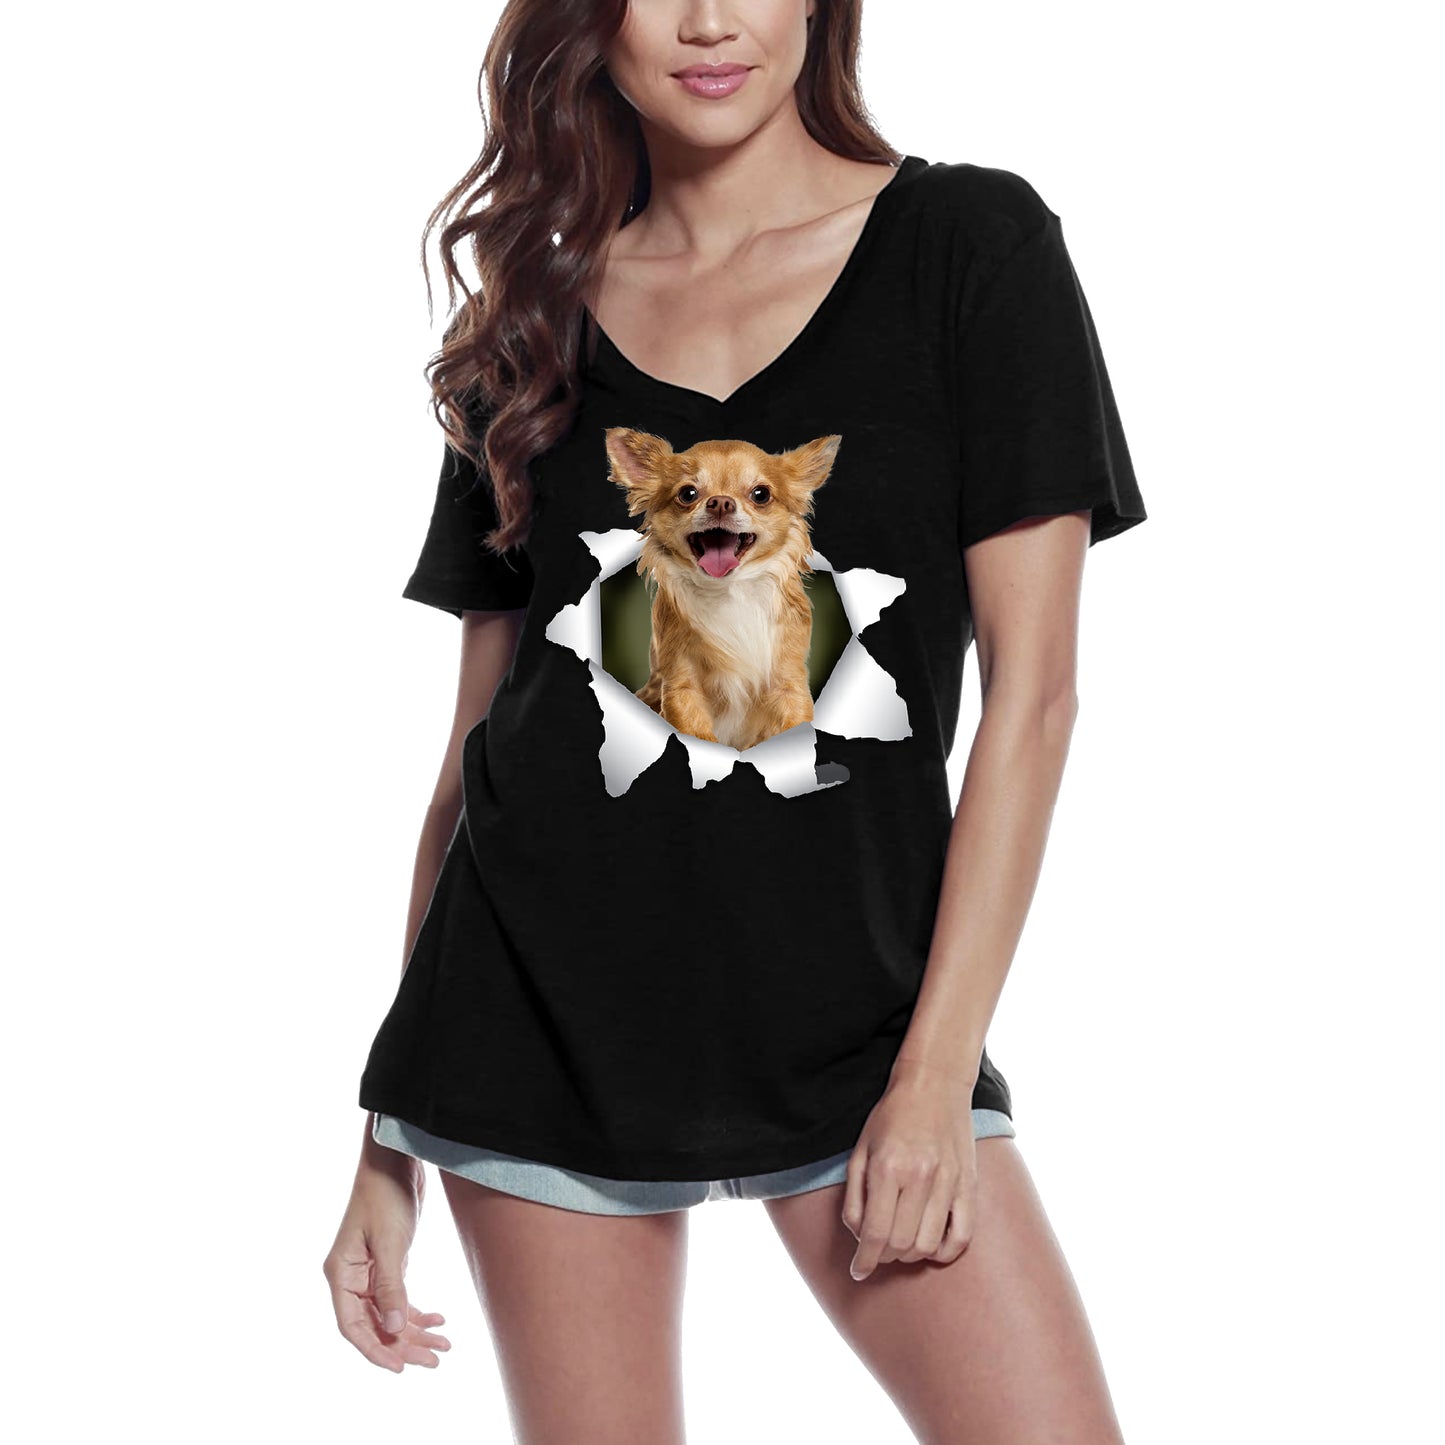 ULTRABASIC Graphic Women's T-Shirt Poodle Chihuahua - Cute Small Dog